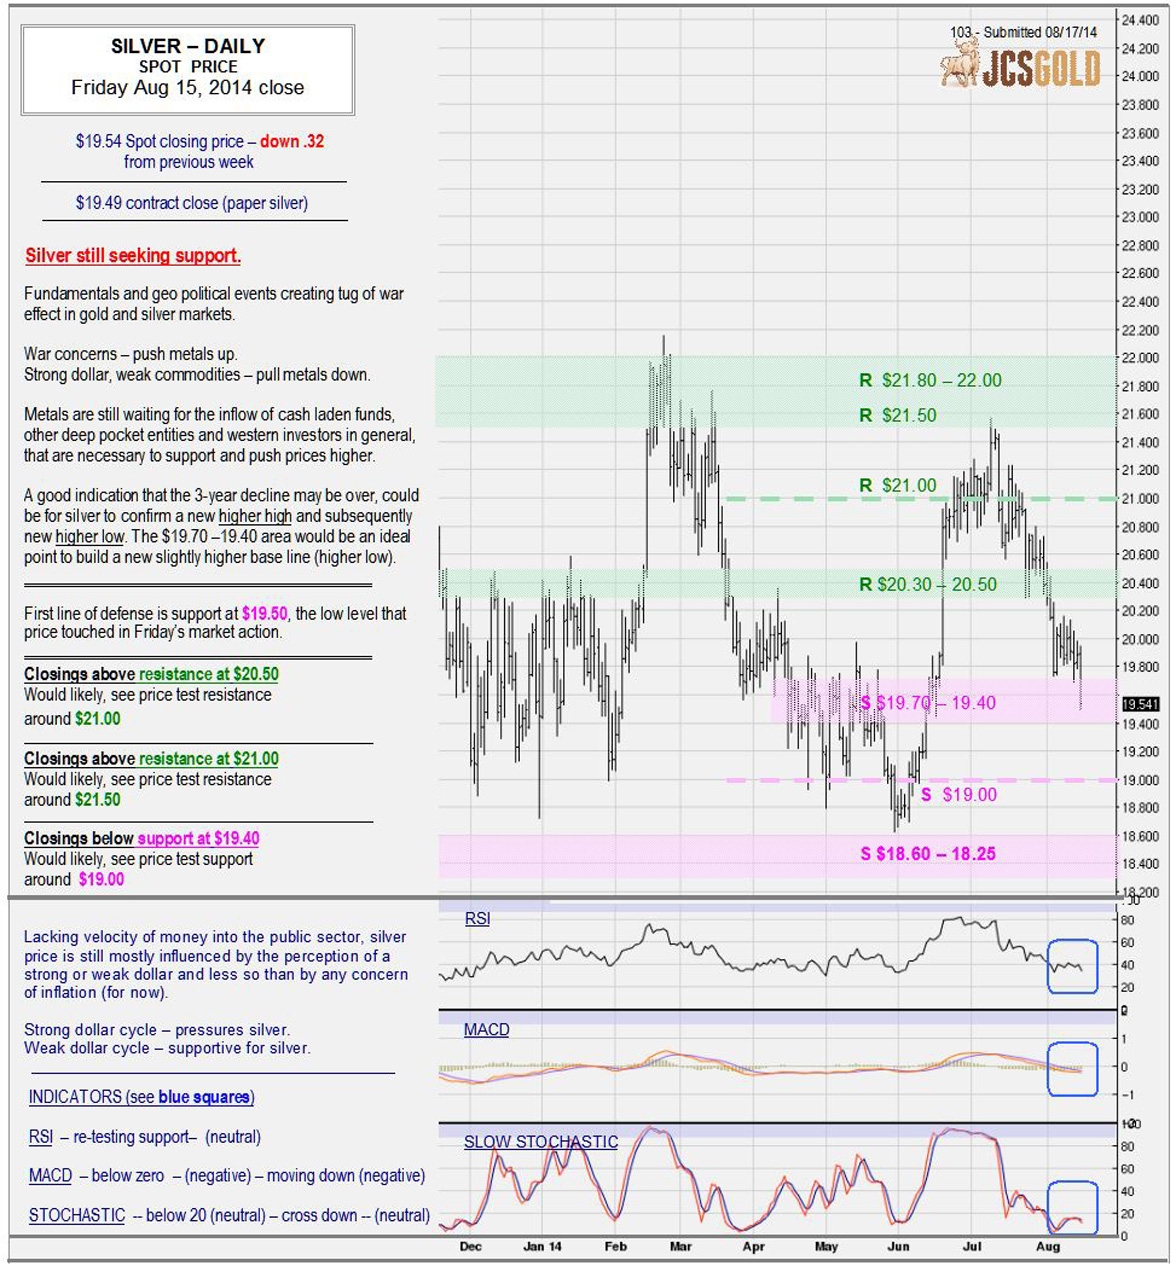 Aug 15, 2014 chart & commentary